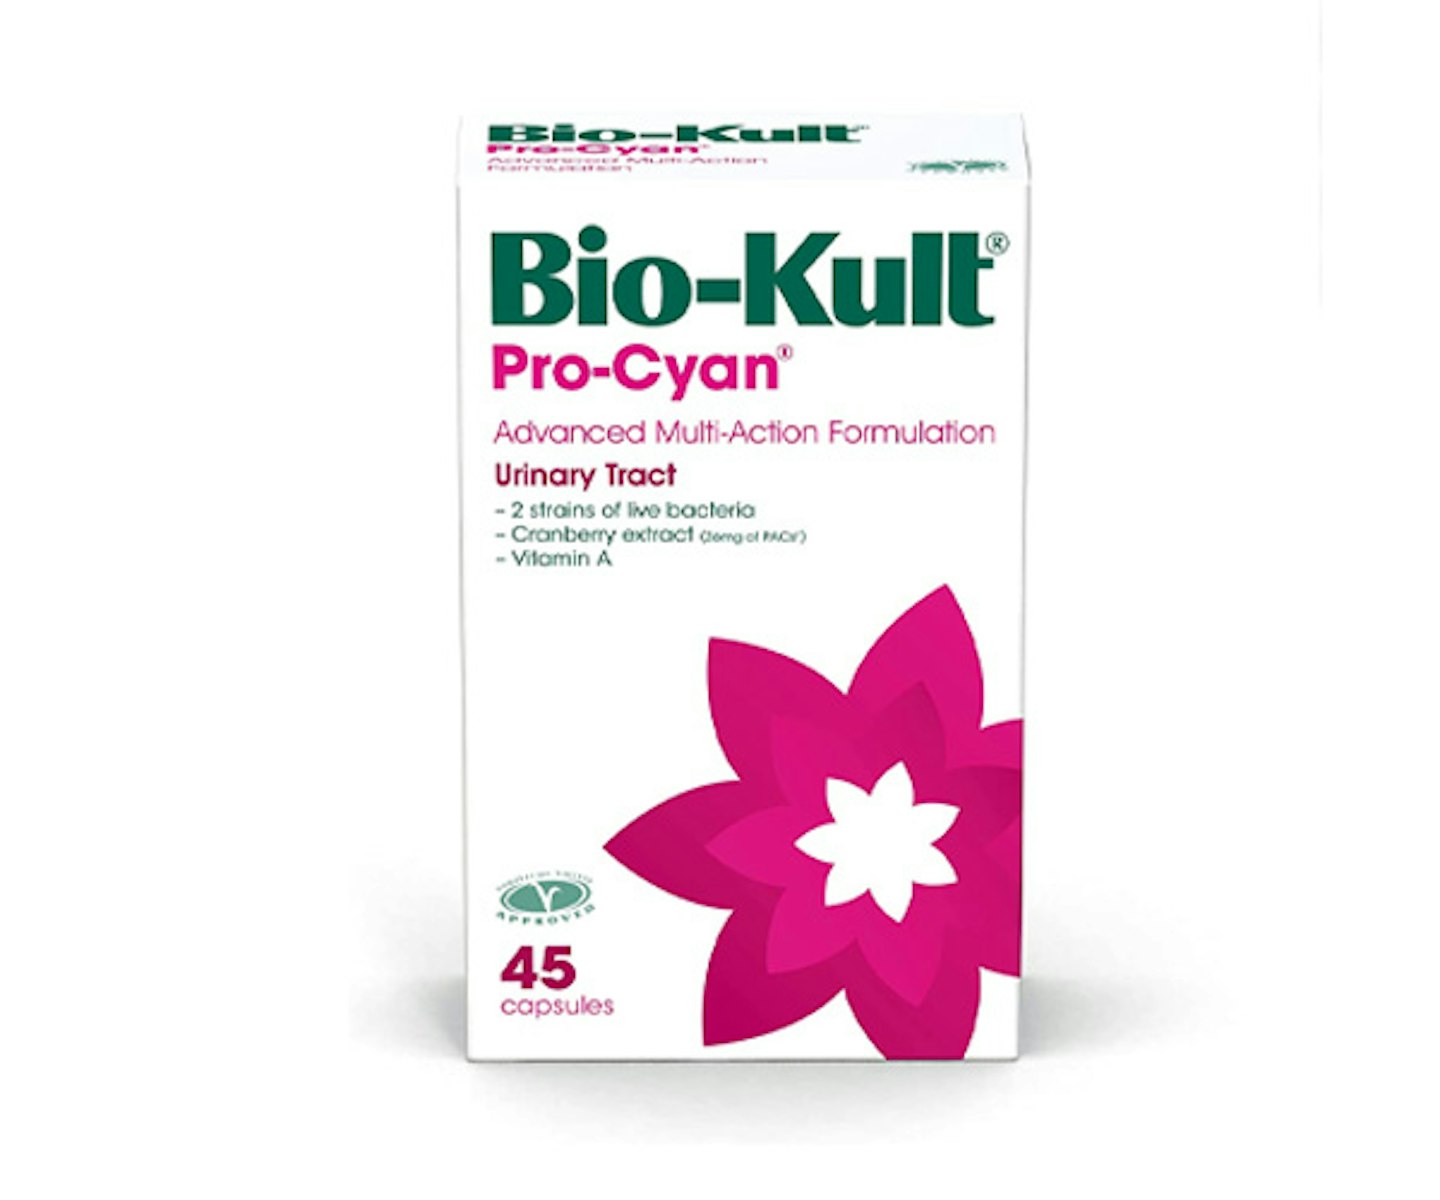 Bio-Kult Pro-Cyan Advanced Multi-Action Bacterial Formulation Targeting Urinary Tract